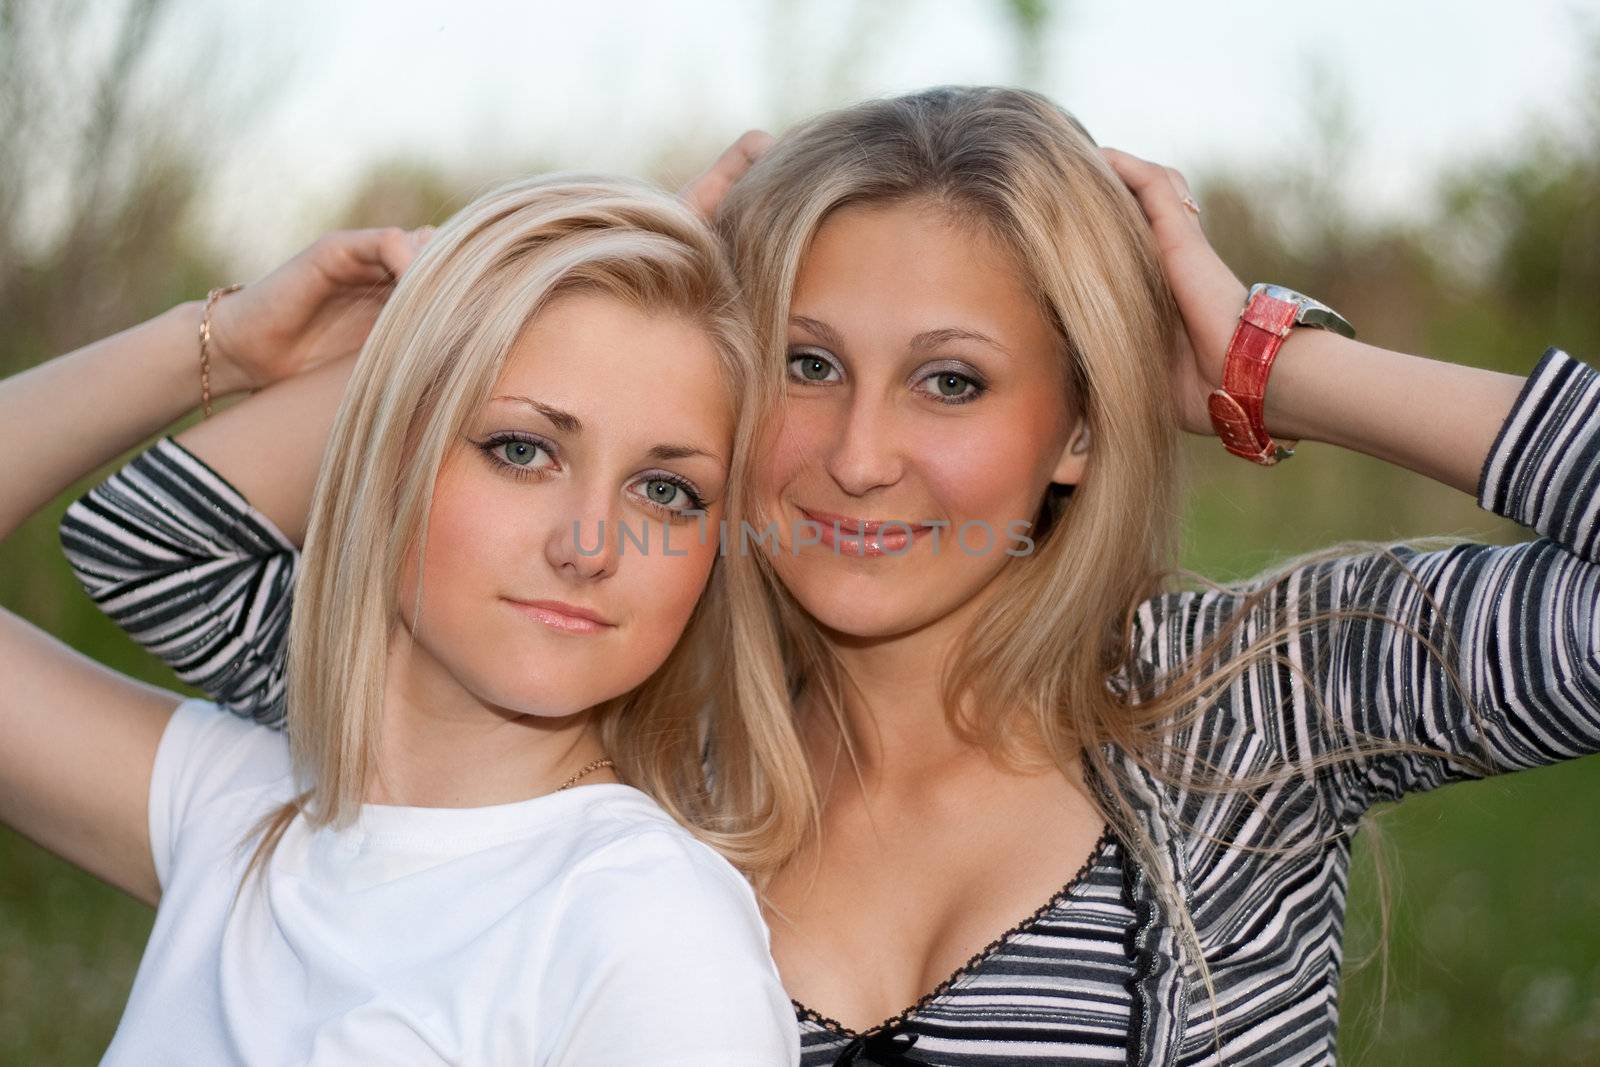 Closeup portrait of two attractive young women outdoors